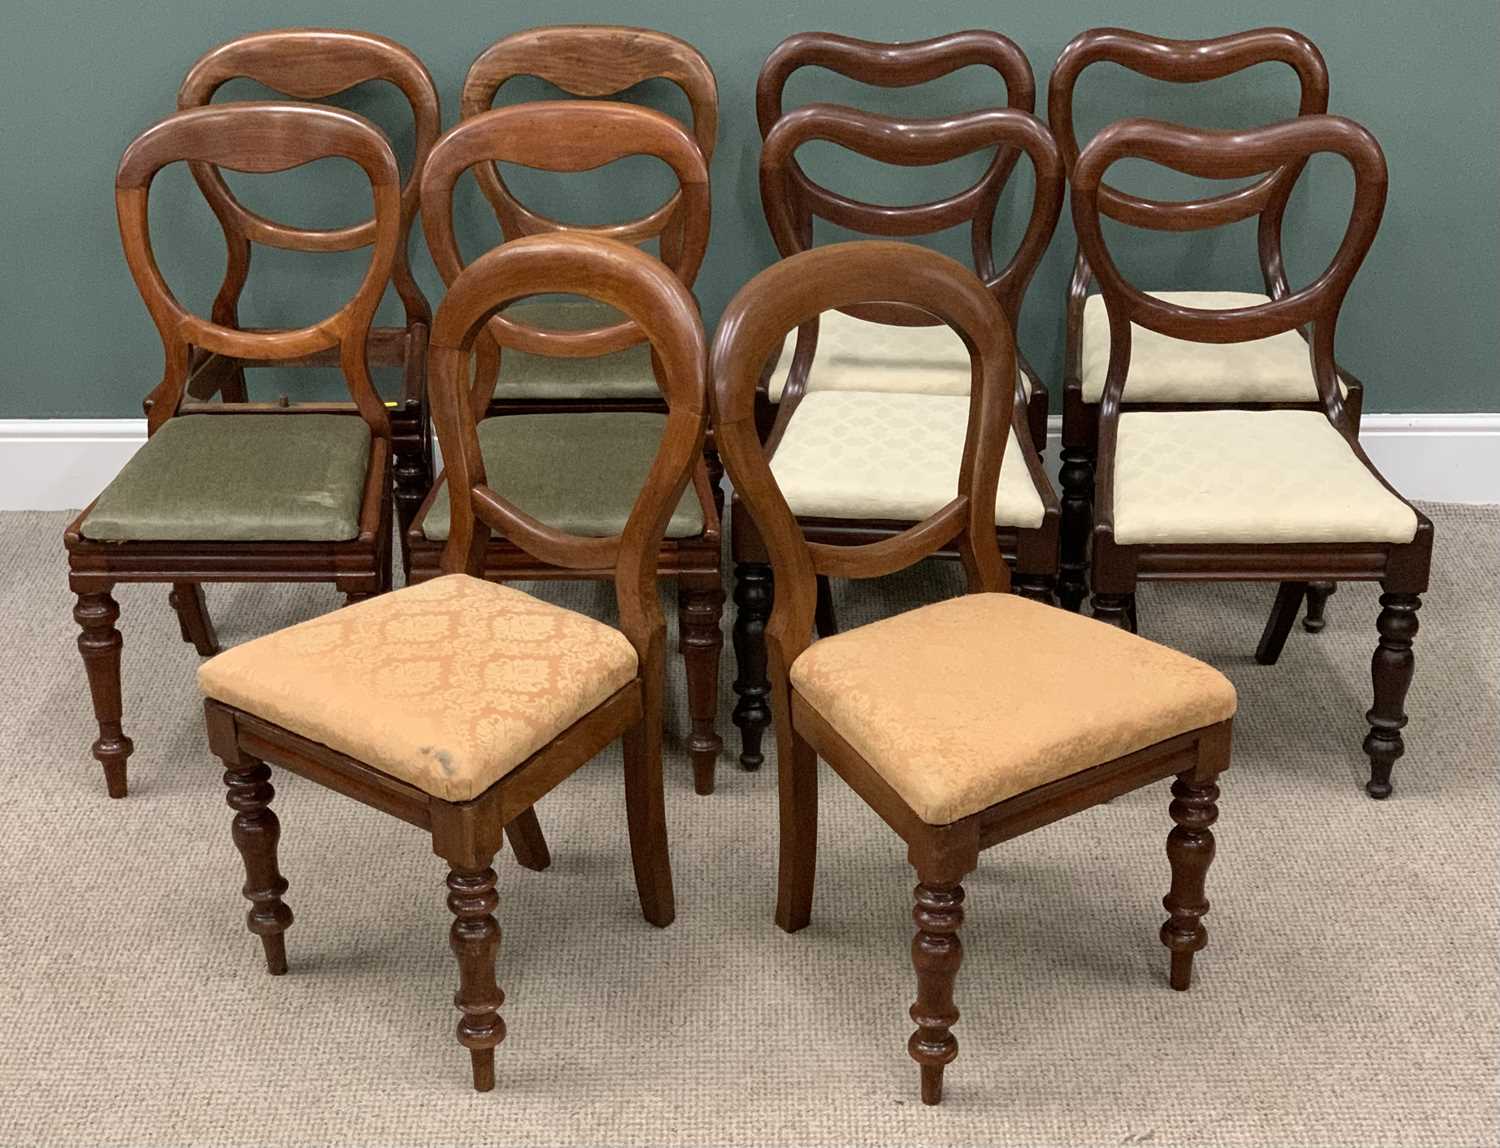 TEN VICTORIAN MAHOGANY BALLOON BACK DINING CHAIRS Provenance: Private collection Conwy